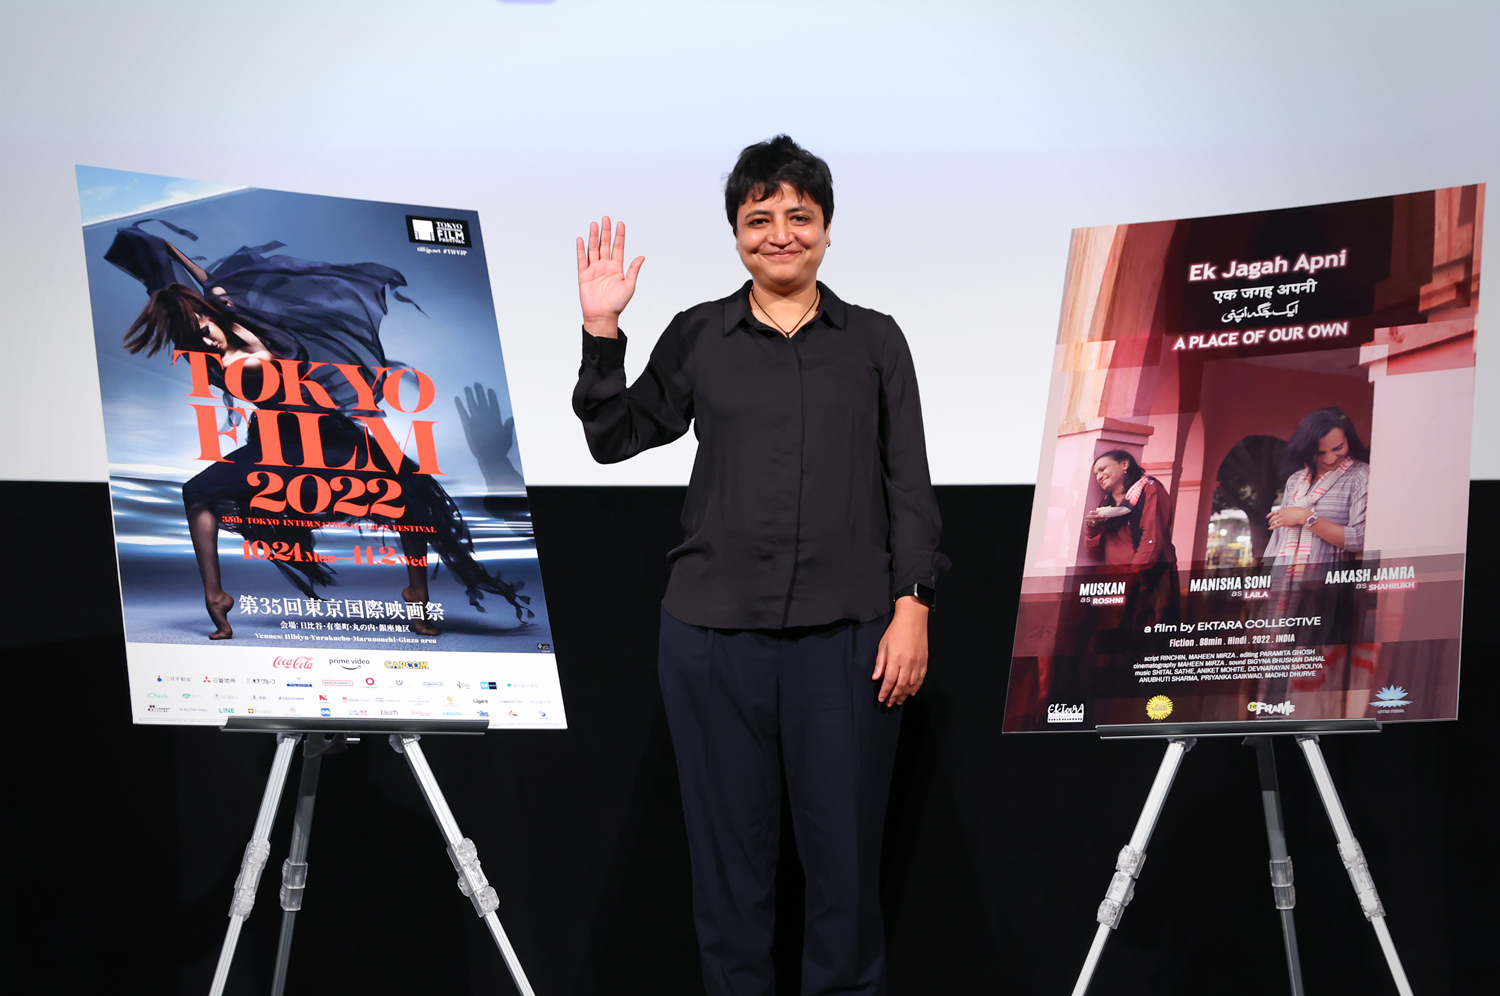 A Place of Our Own Q&A: Maheen Mizra (Screenplay/Cinematographer)